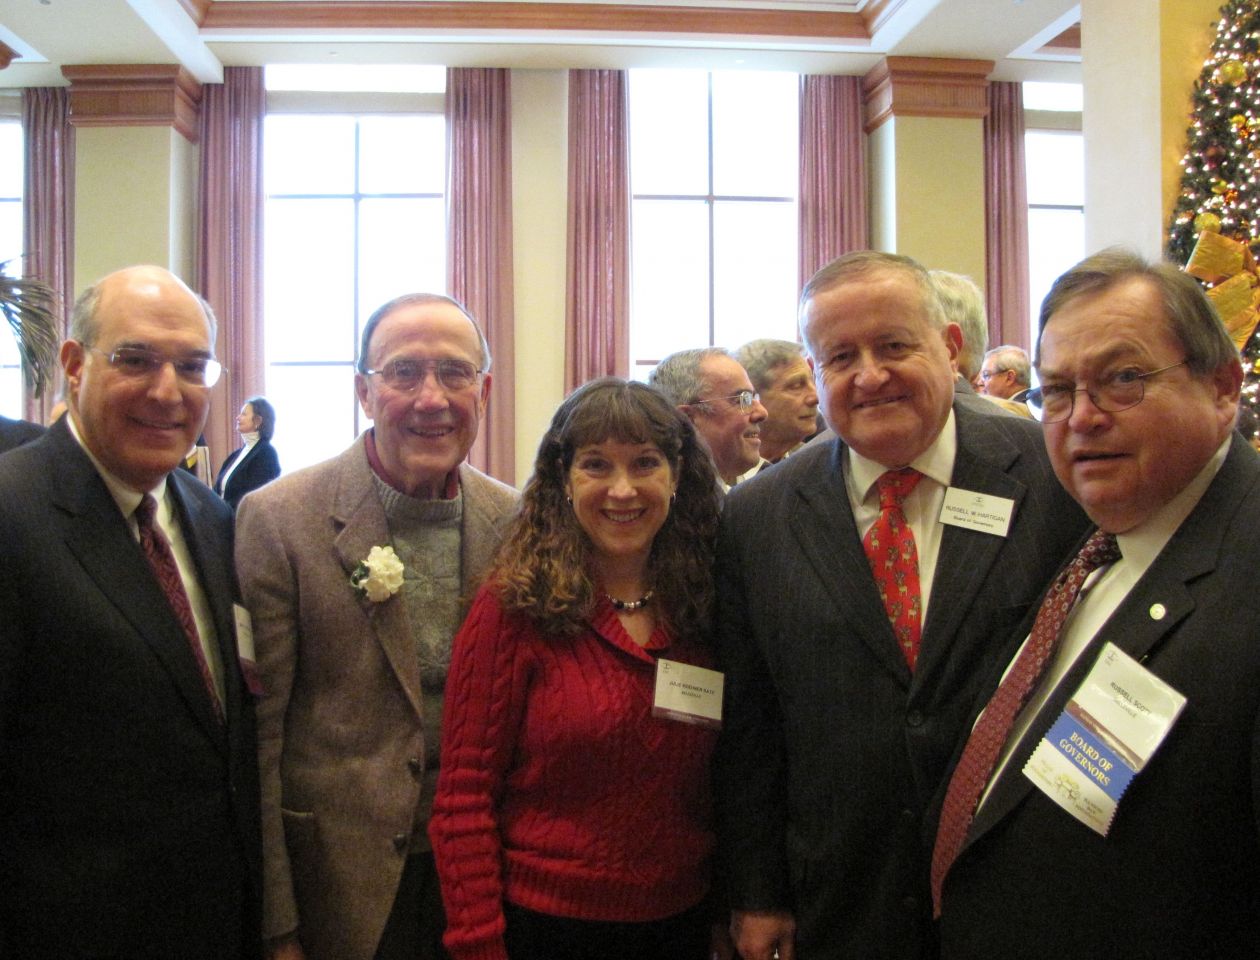 (Click to enlarge) ISBA President-Elect Mark Hassakis, Class of 1959 honoree Jim Keehner, his daughter, Julie Keehner Katz and ISBA Board of Governors members Russell Hartigan and Russell Scott